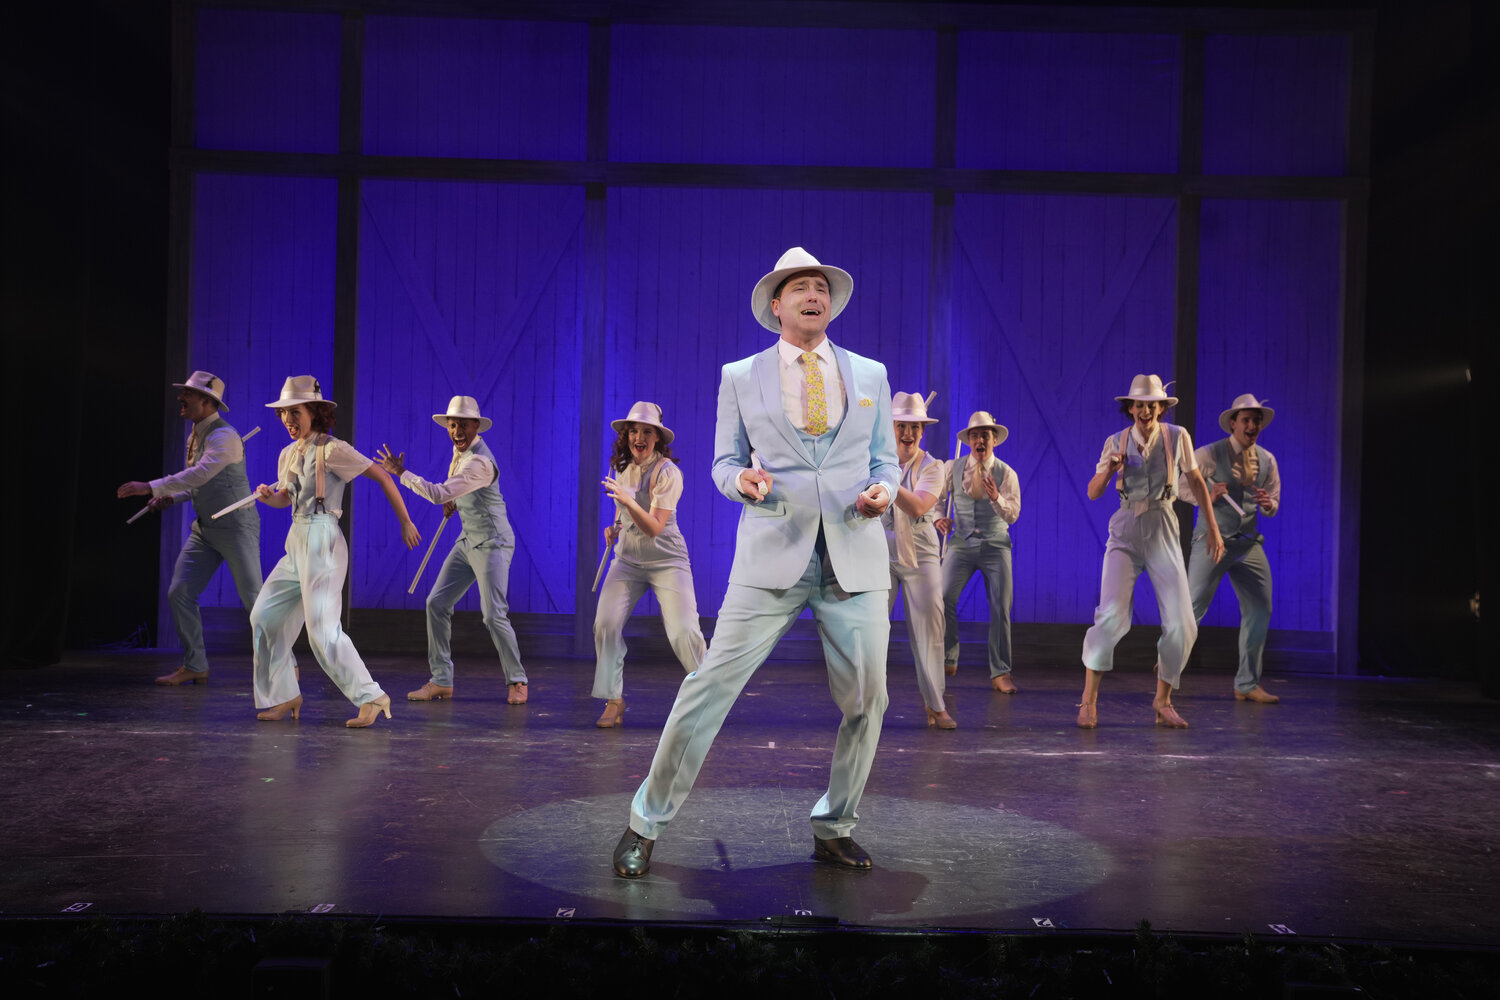 Jeremiah James performs with the cast of “Irving Berlin’s White Christmas” at Bucks County Playhouse through Dec. 31.